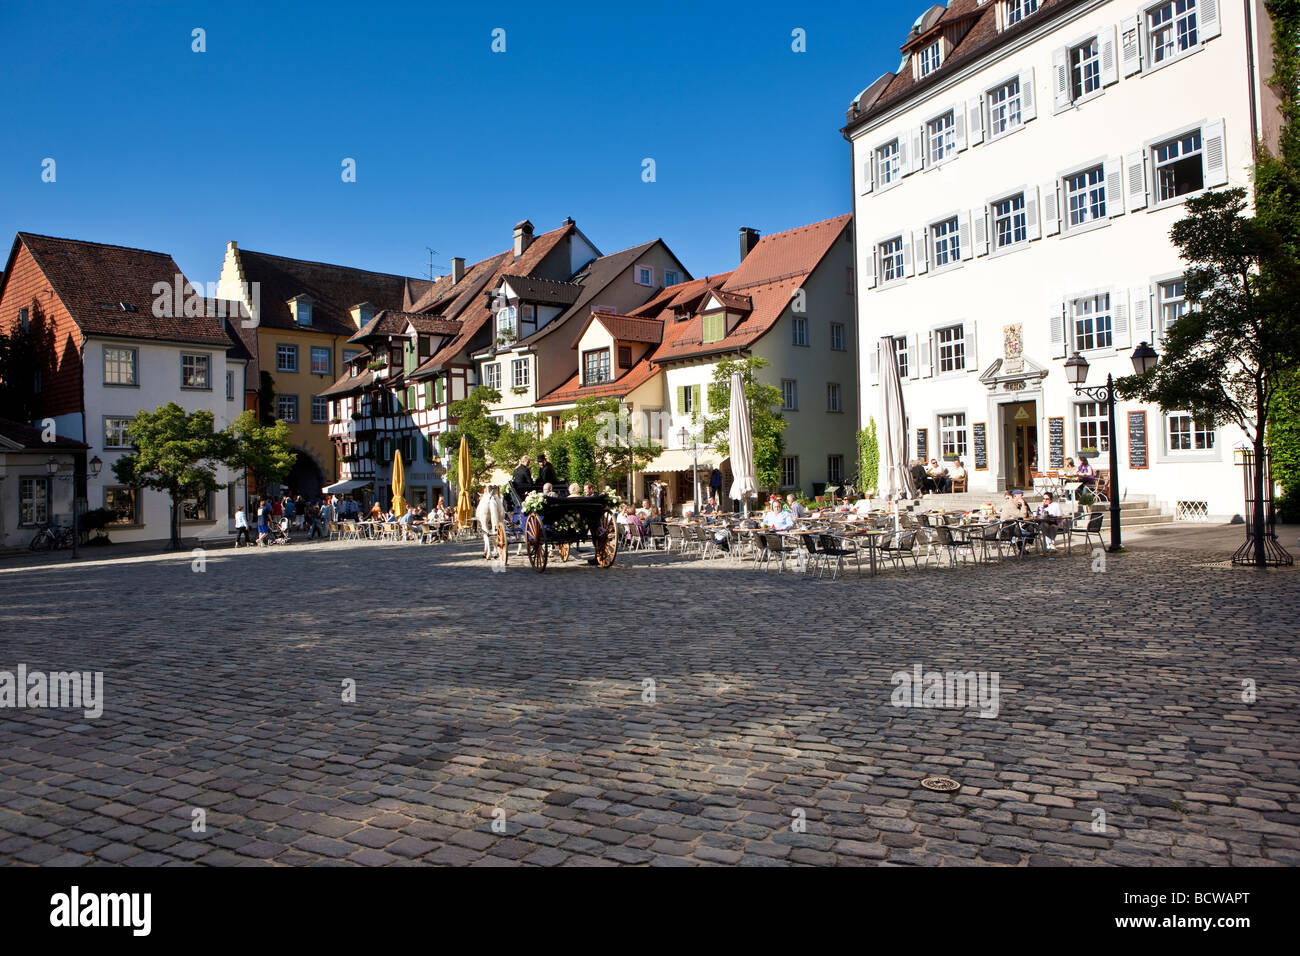 Marketplace with wedding carriage, Meersburg on Lake Constance, administrative district of Tuebingen, Bodenseekreis district, B Stock Photo